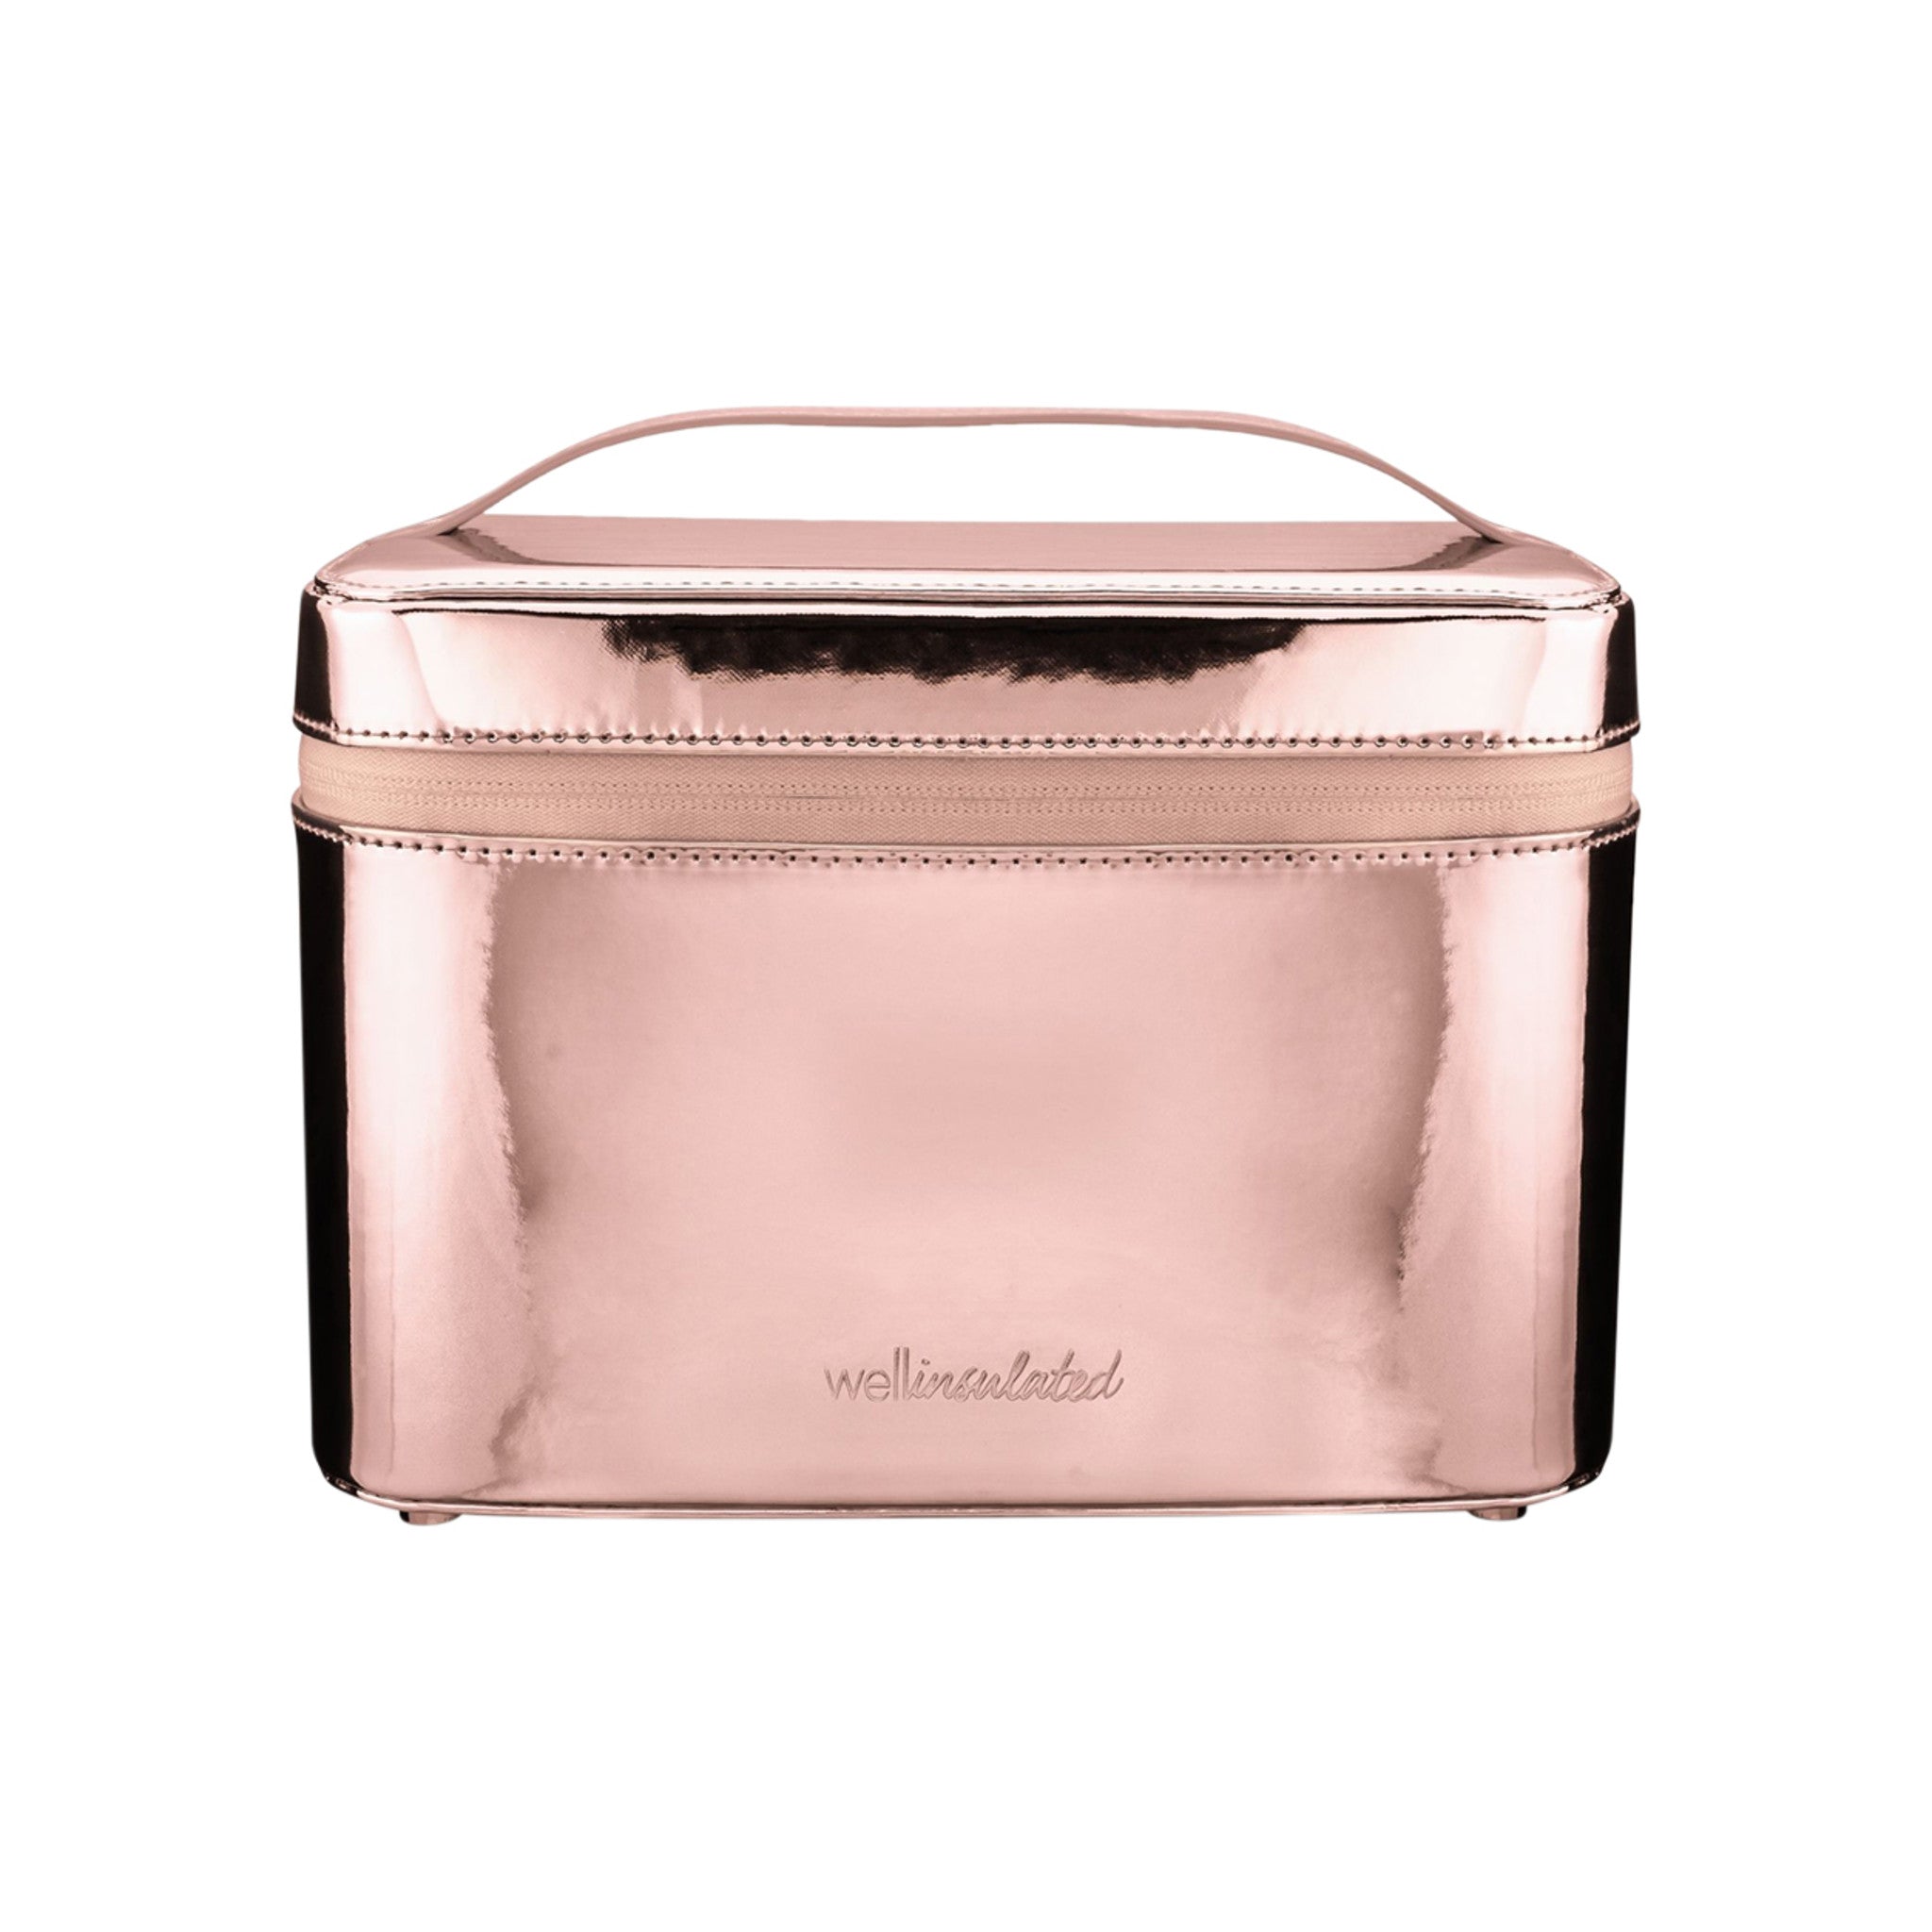 Wellinsulated Performance Beauty Case Color/Shade variant: Rose Gold main image.